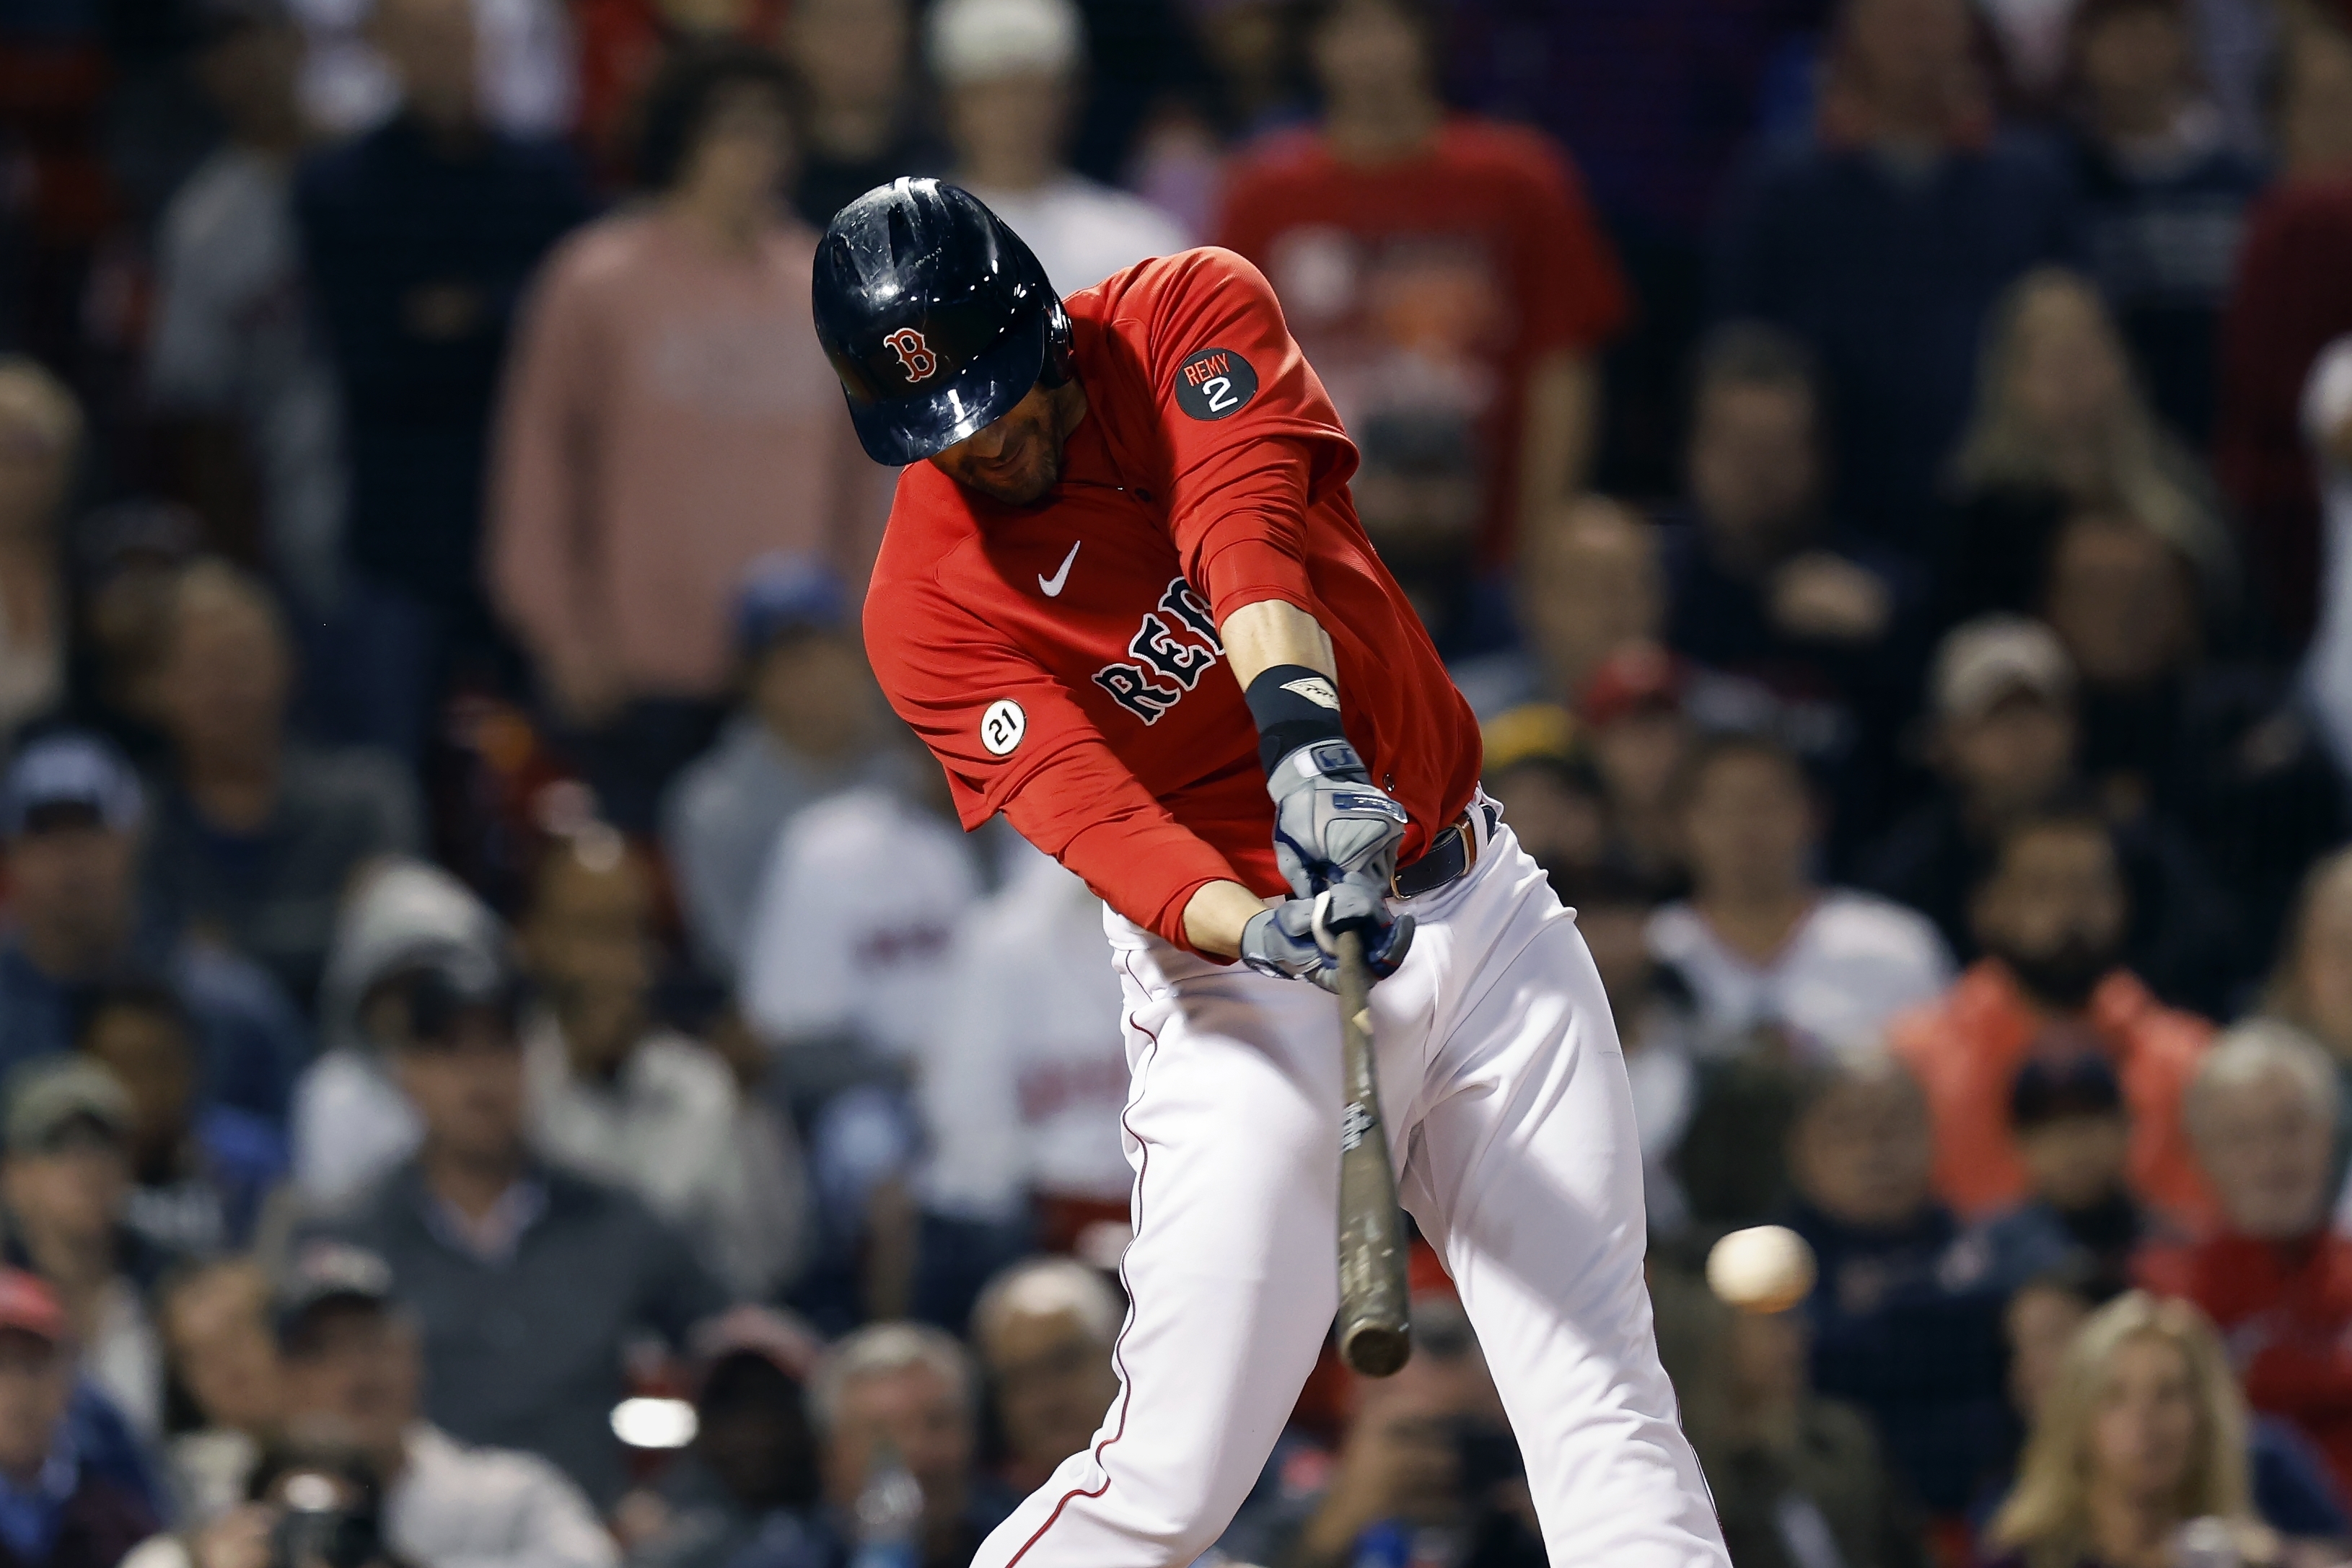 In the midst of a frustrating season, J.D. Martinez delivers as